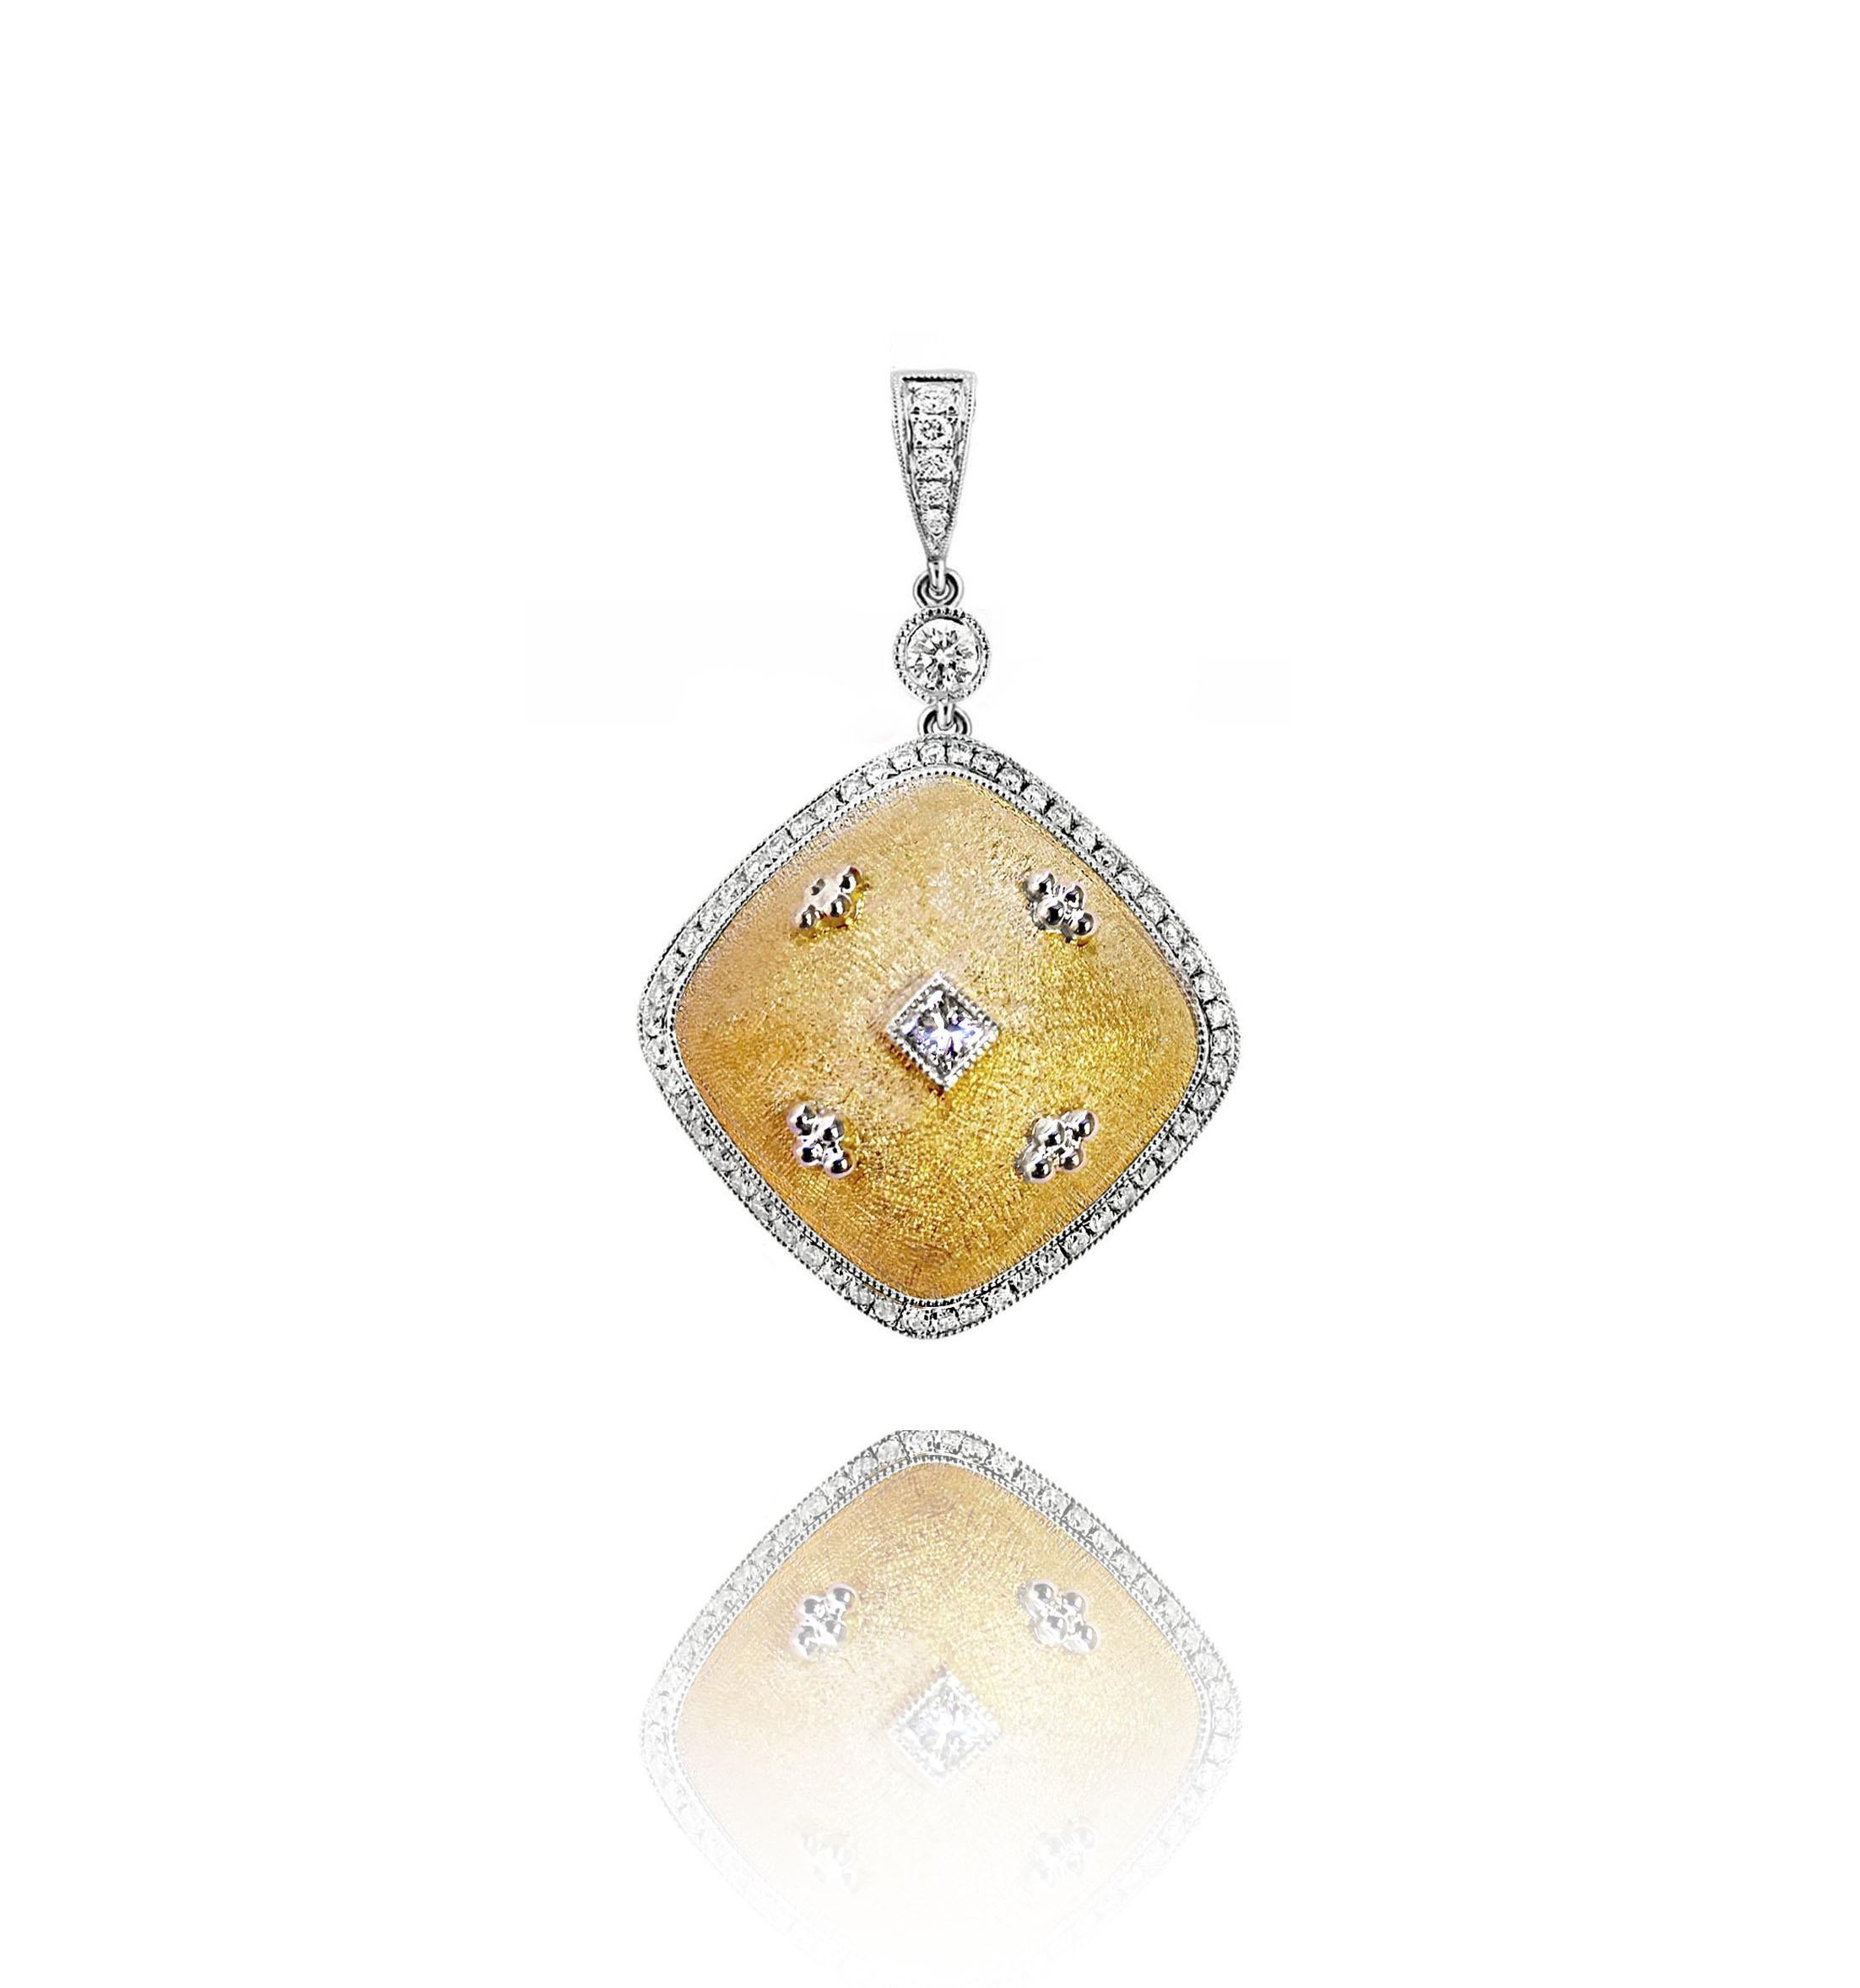 Produced by award winning Italian designer Stefano Vitolo. Stefano creates custom artisanal one of a kind jewelry with excellent gemstones in a truly old world Italian craftmanship.

This handcrafted pendant has 0.57 total carat weight of F/G color,